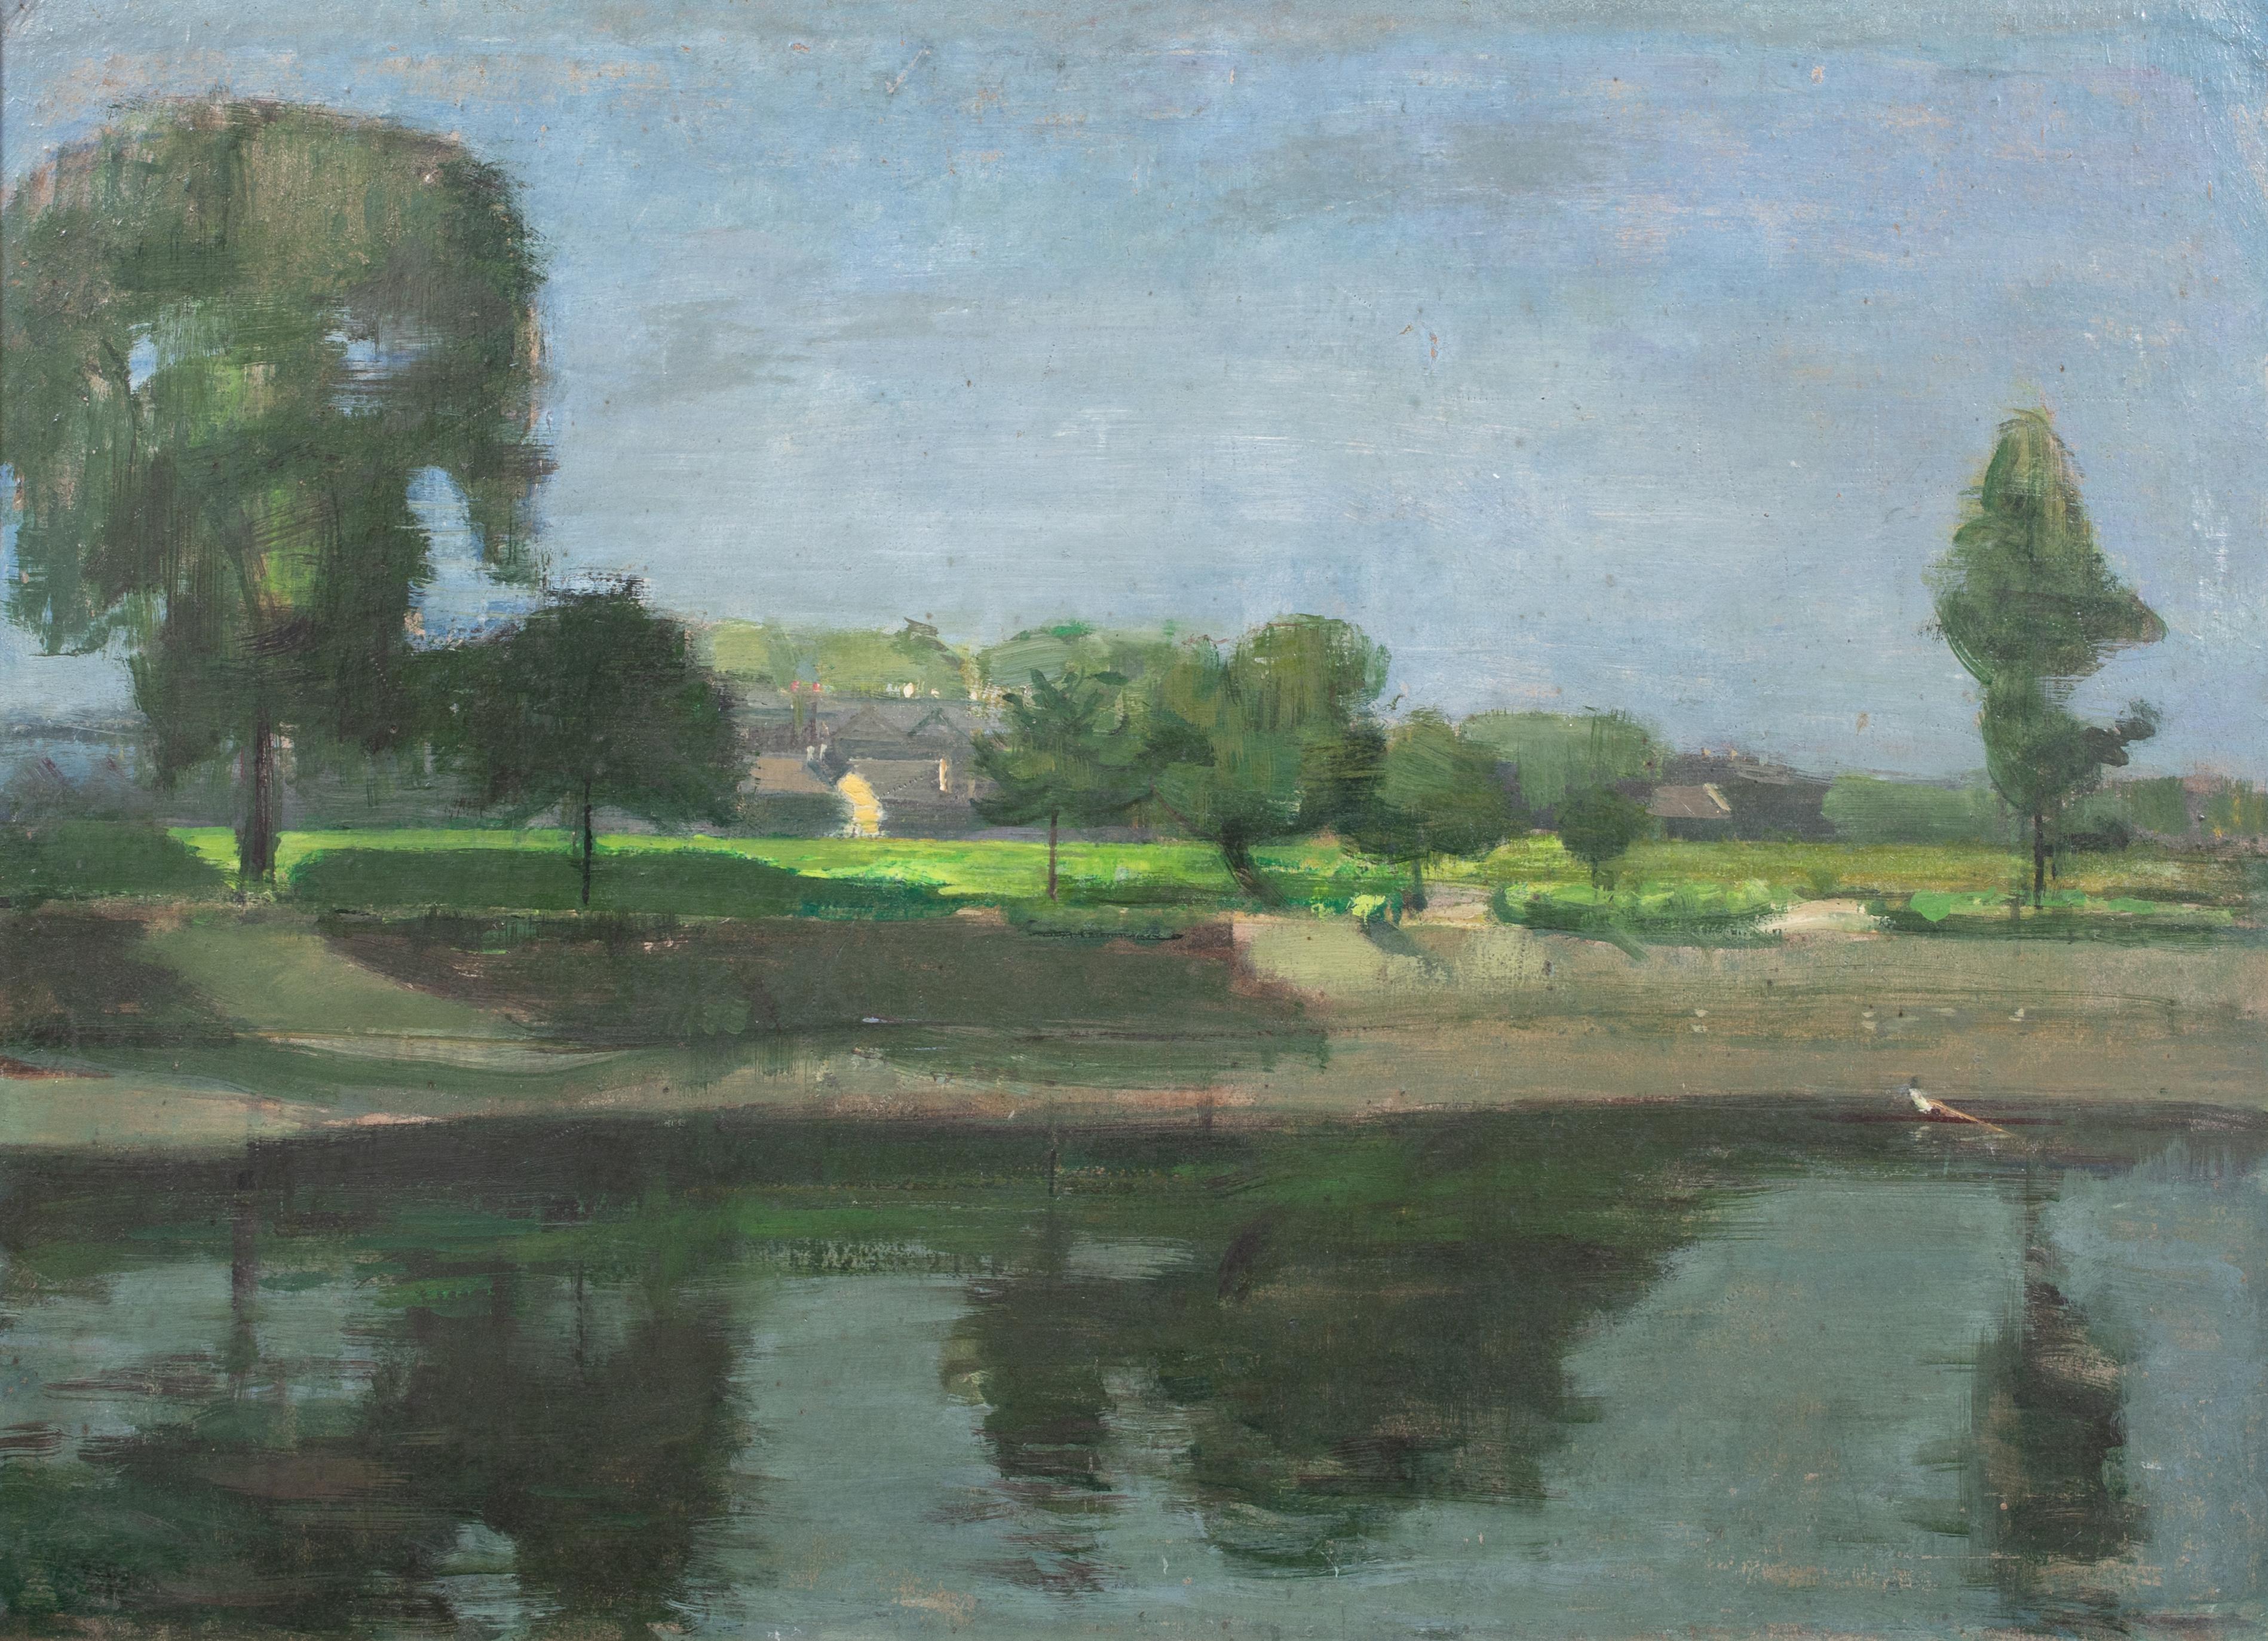 Morning On The River Thames, Barnes, circa 1935

by RUSKIN SPEAR (1911-1990) sales to $75,000

Large circa 1935 view of the River Thames, Barnes with a figure rowing in the distance, oil on board by Ruskin Spear. Excellent quality and condition